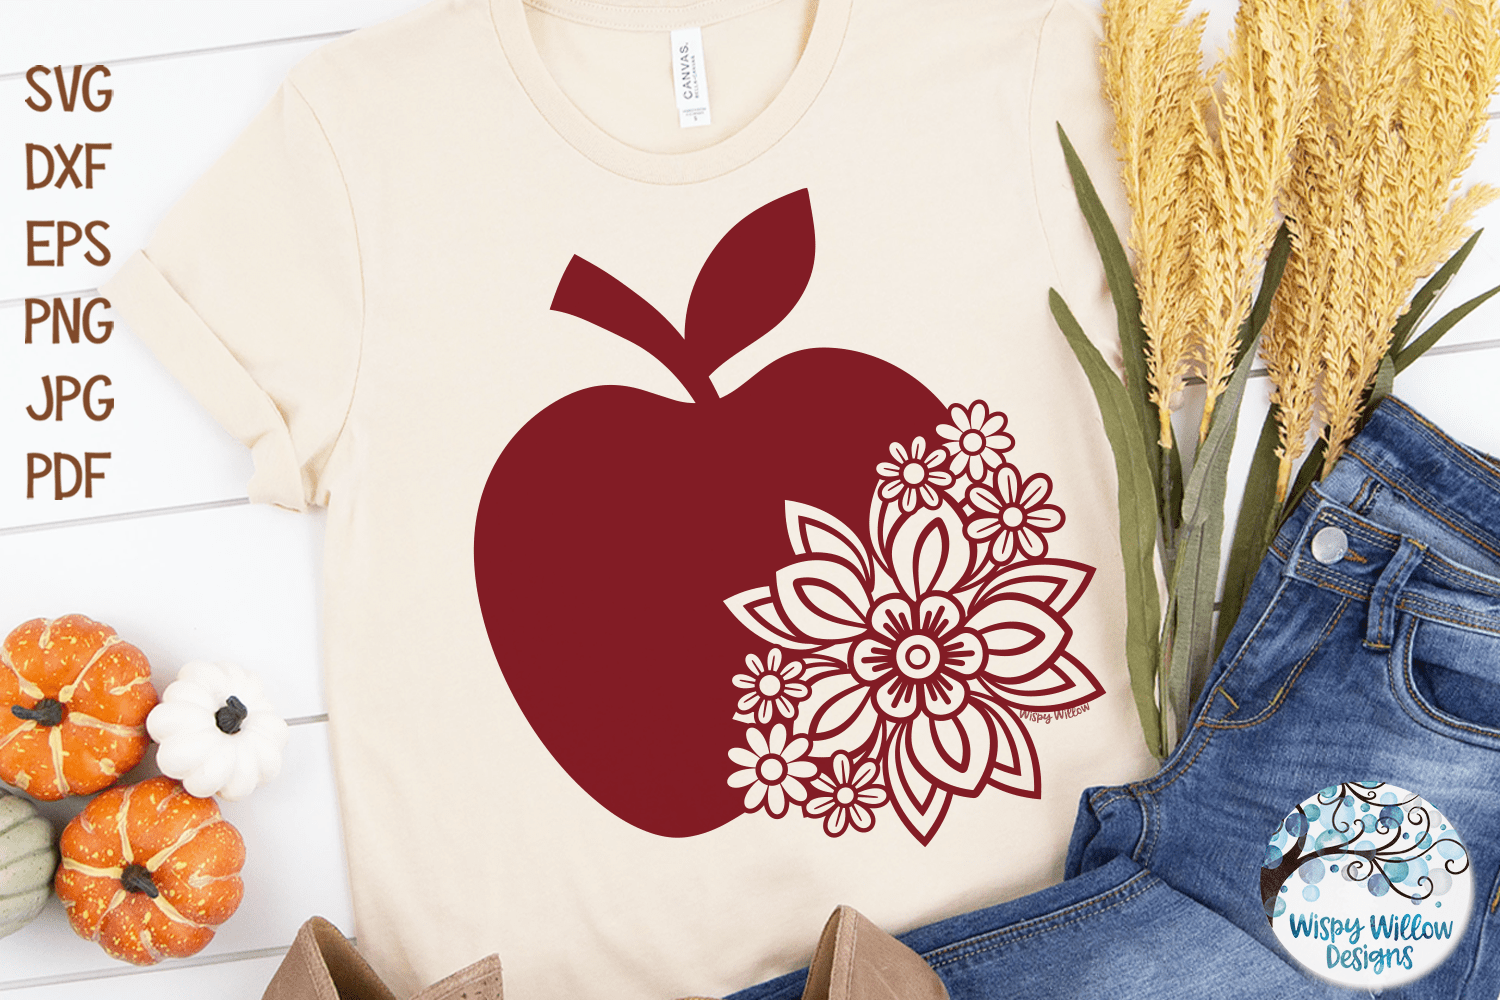 Floral Apple SVG Wispy Willow Designs Company